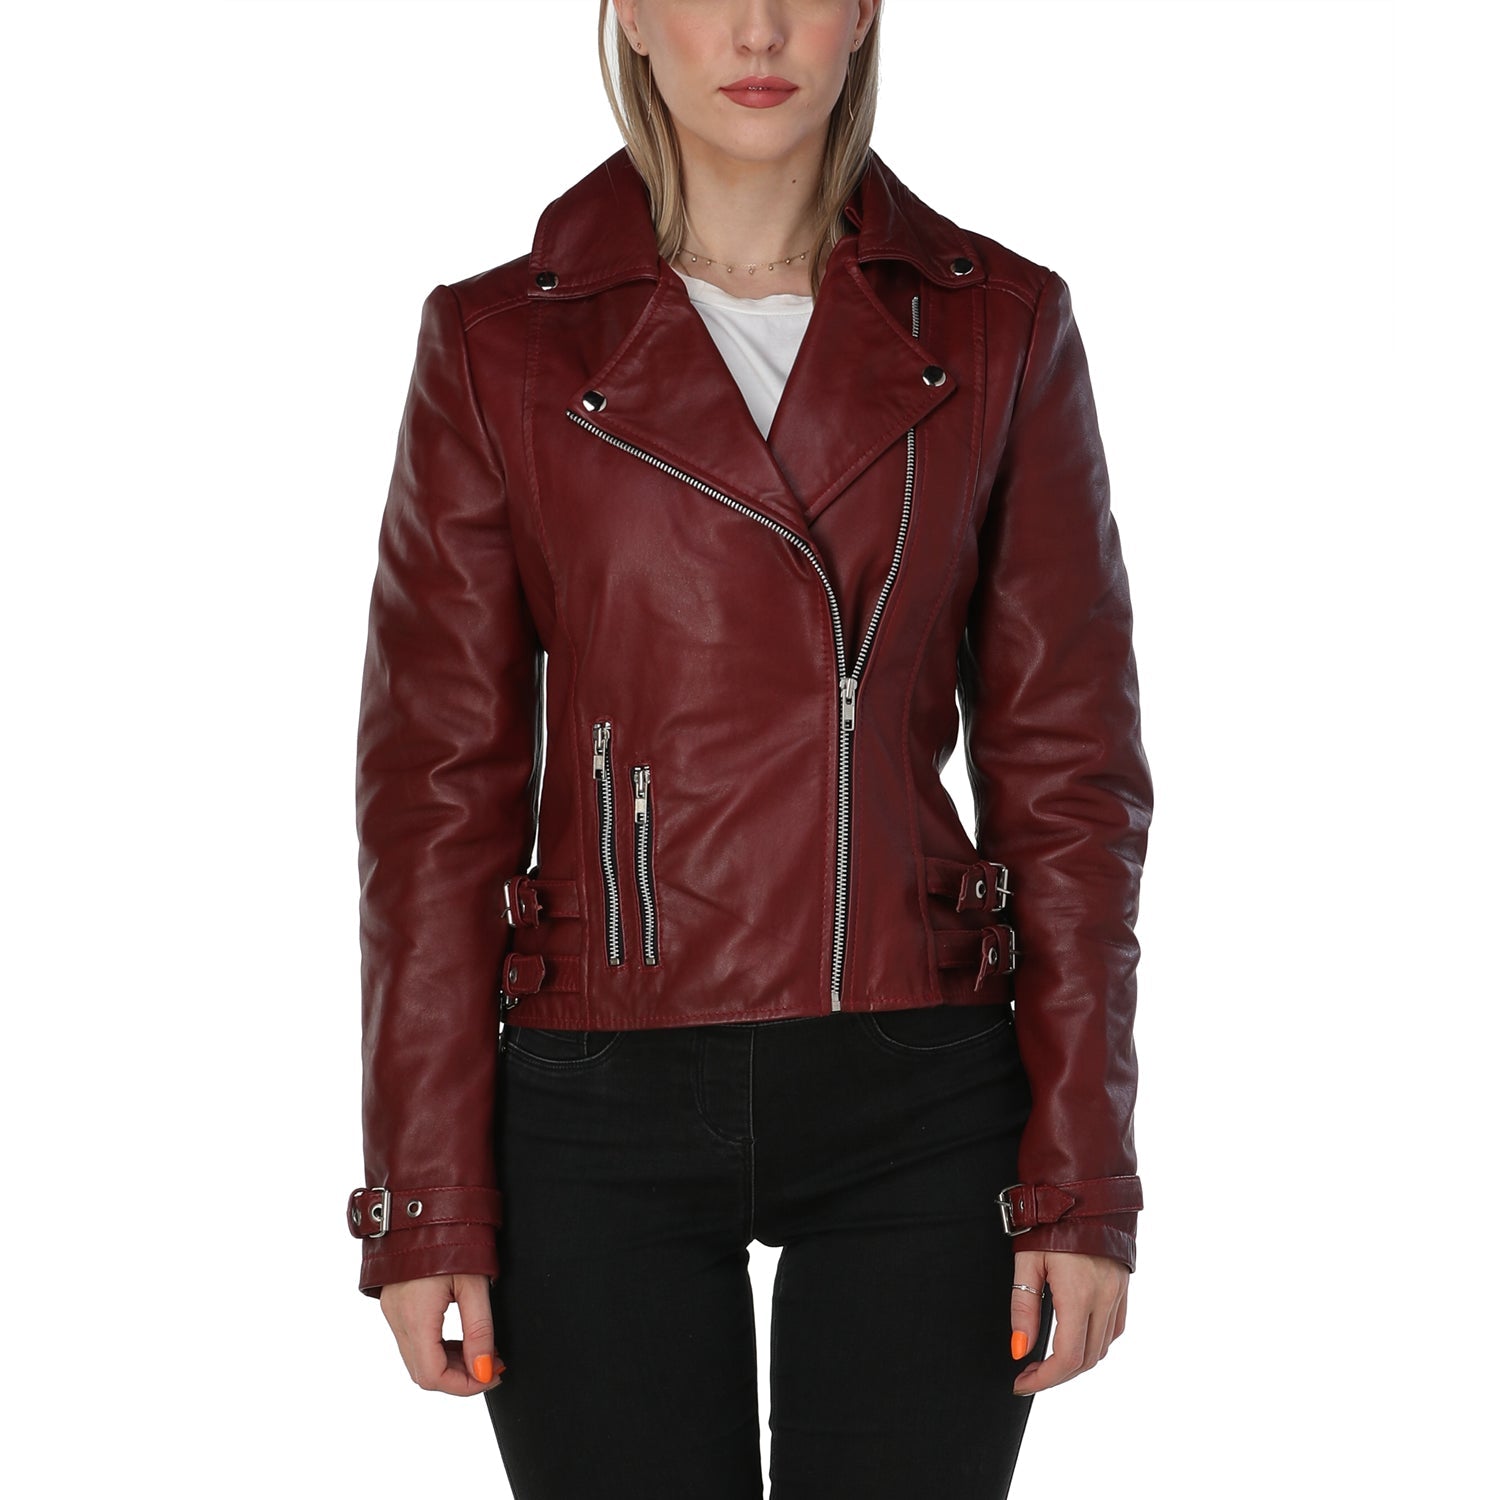 Womens Maroon Genuine Leather Bomber Jacket | Removable Hood